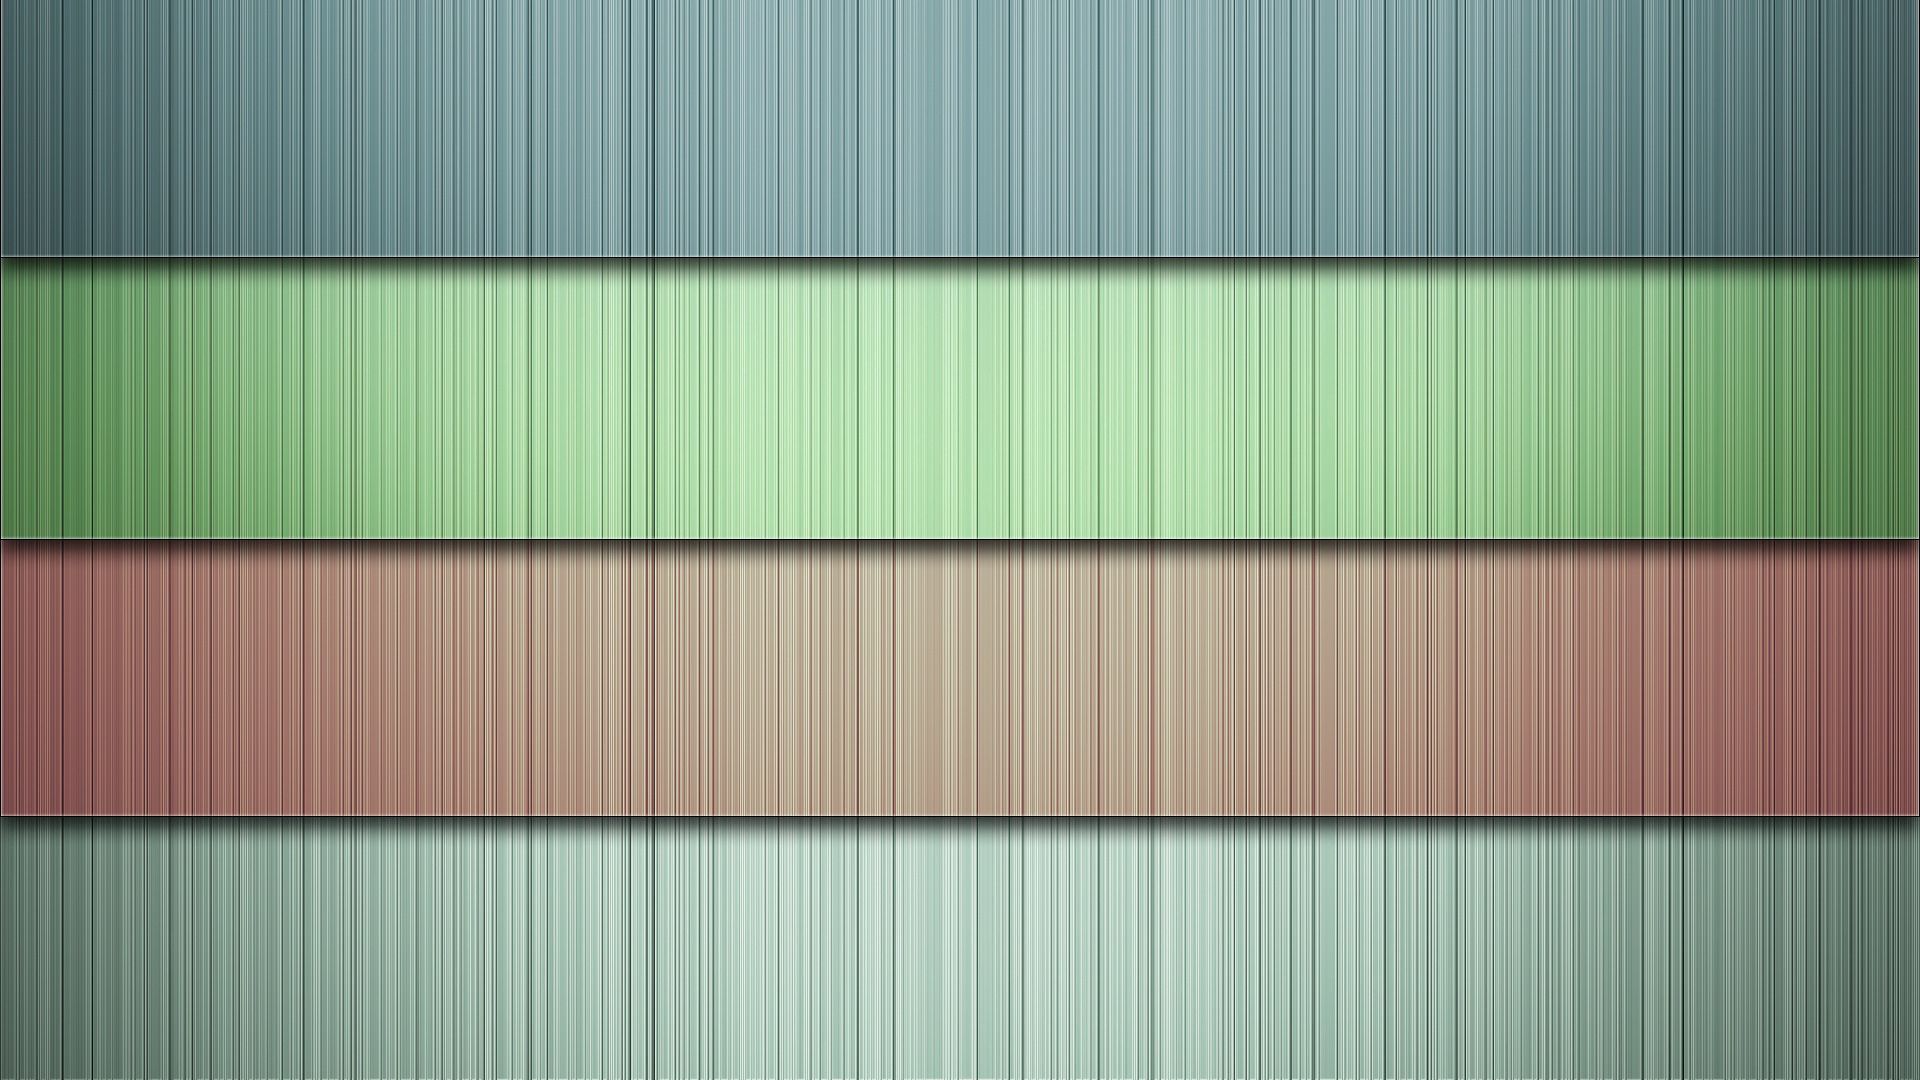 android streaks, textures, stripes, lines, texture, background